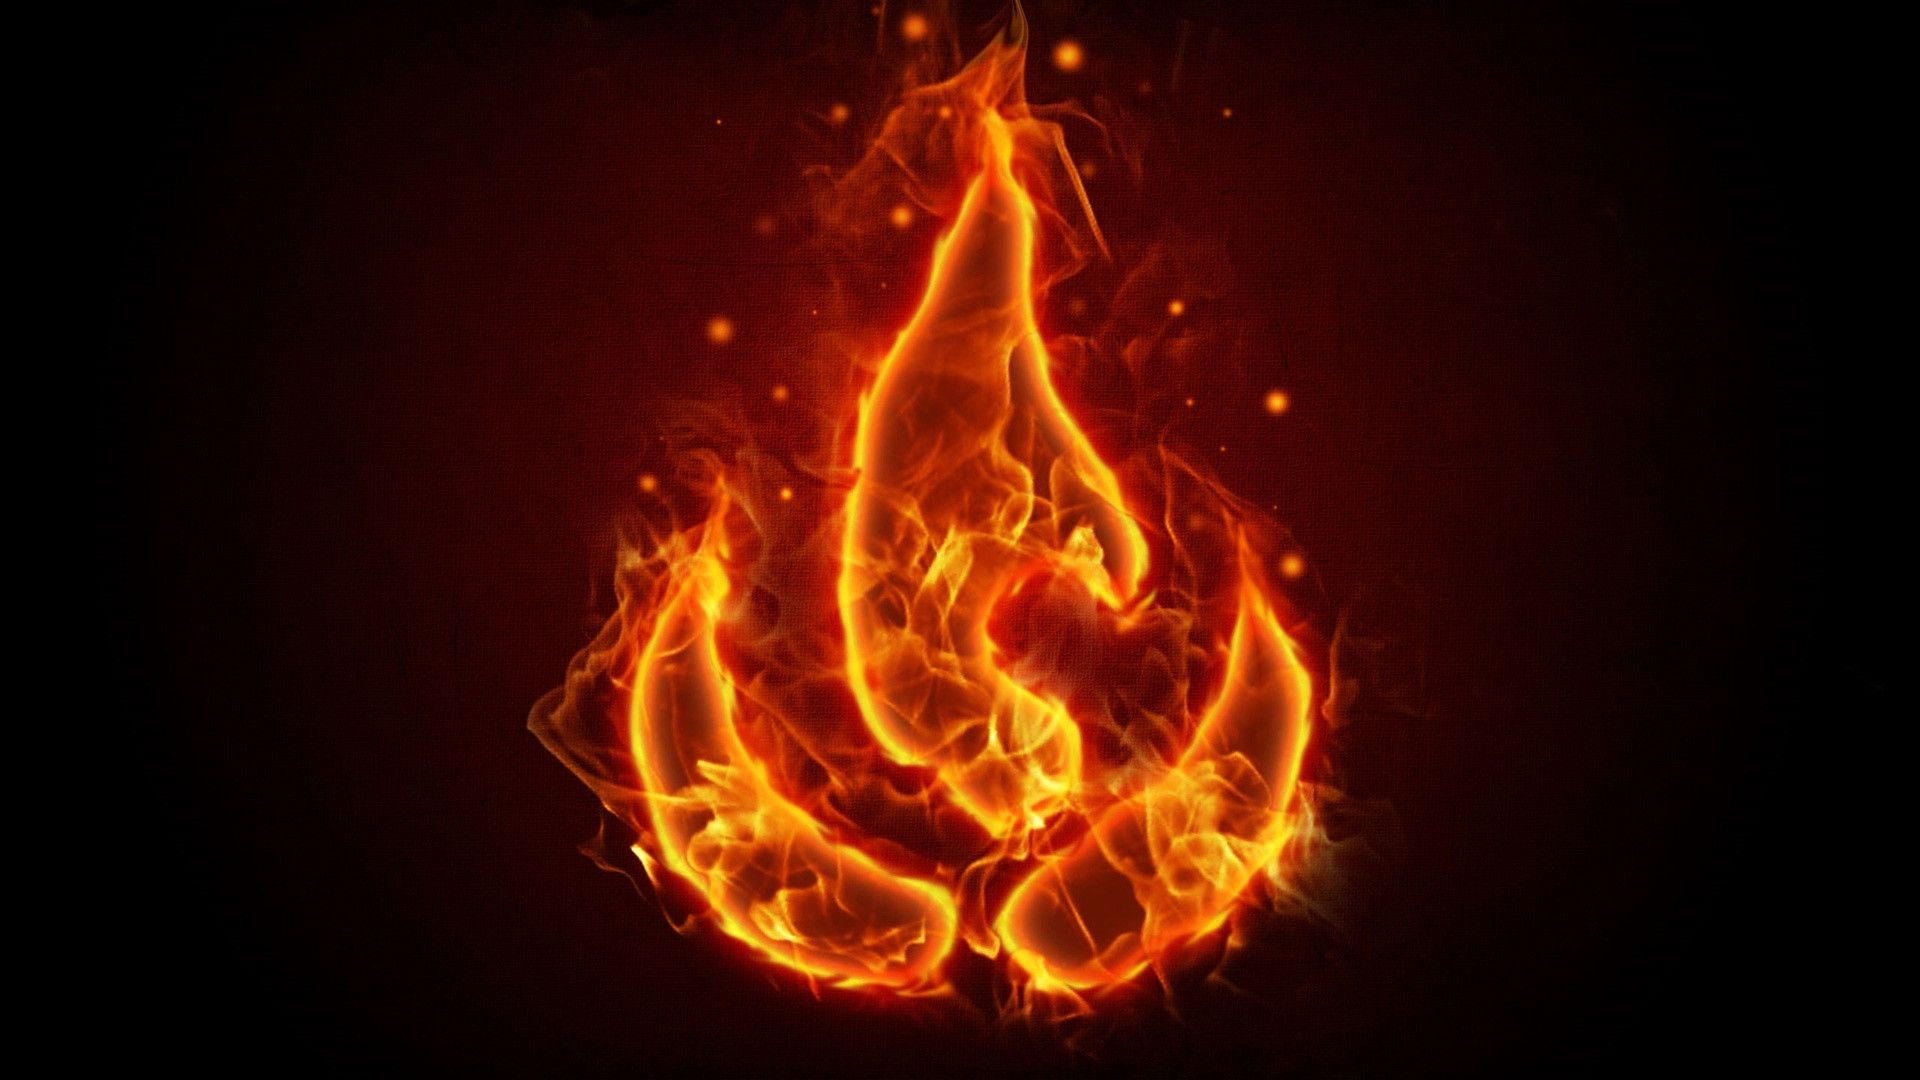 Fire Wallpaper Background Image Pictures